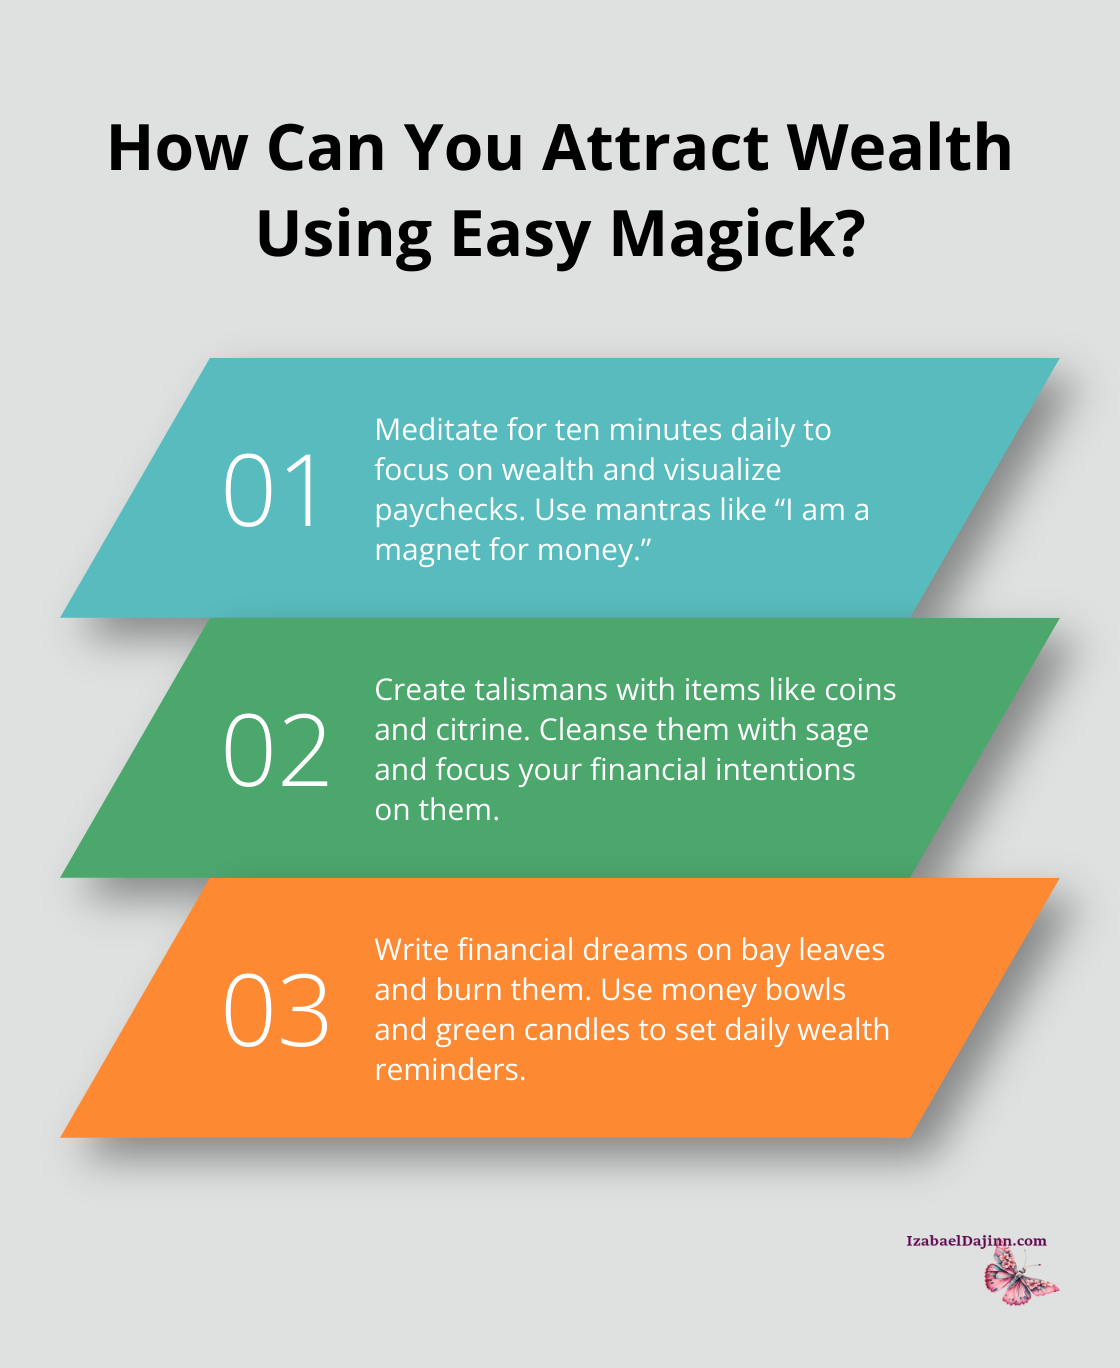 Fact - How Can You Attract Wealth Using Easy Magick?